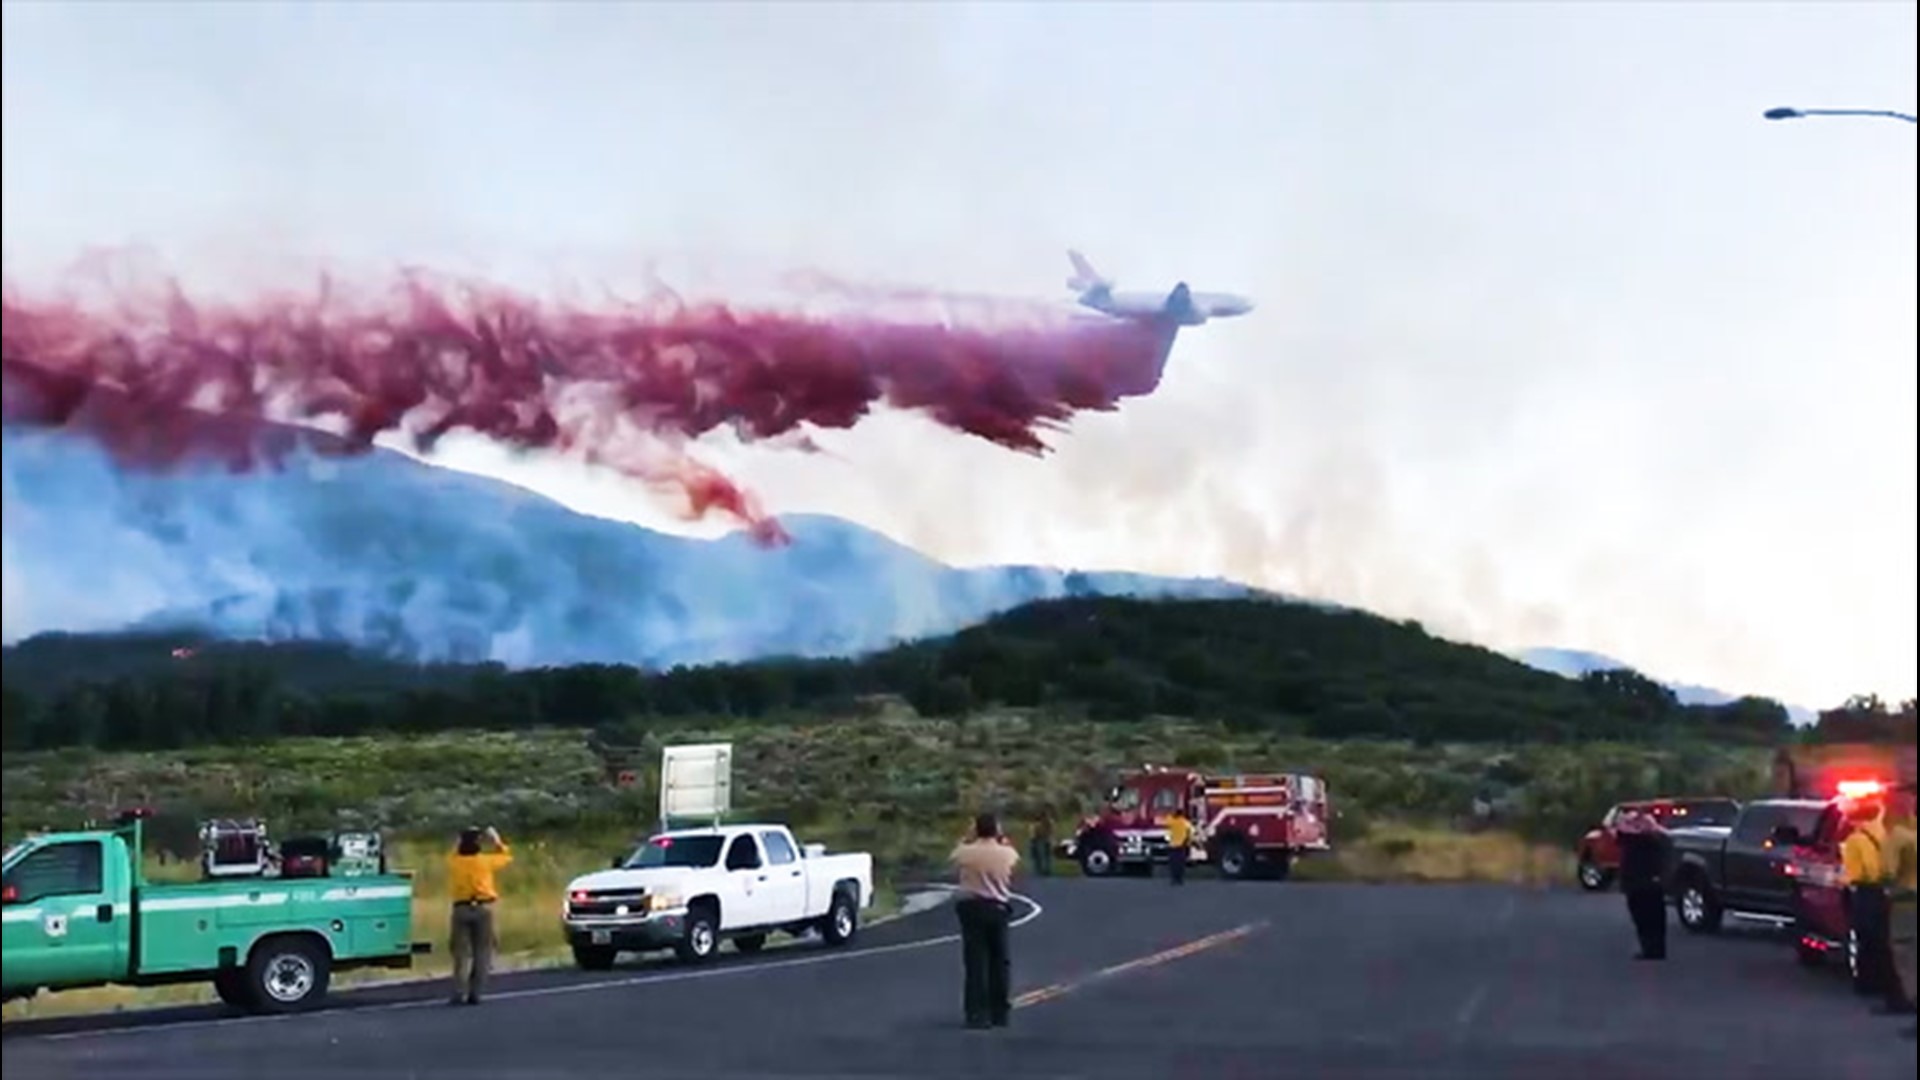 Residents living near Parleys Canyon, Utah, were ordered to evacuate on Aug. 6, as a wildfire quickly grew to more than 200 acres. Planes dropped retardant on the fire, which was believed to pose a threat to structures.